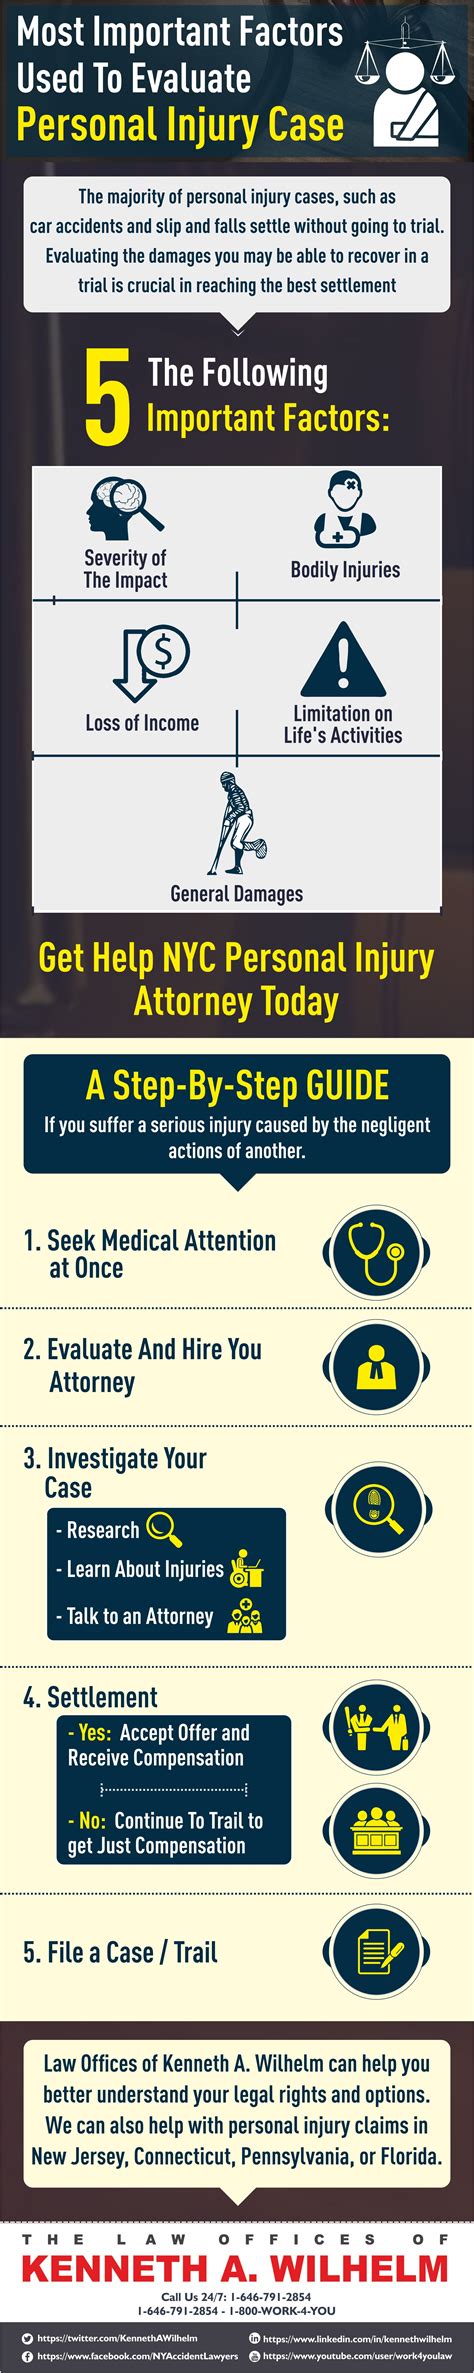 New York Personal Injury Lawyer | Attorney in New York | Injury lawyer, Personal injury lawyer 